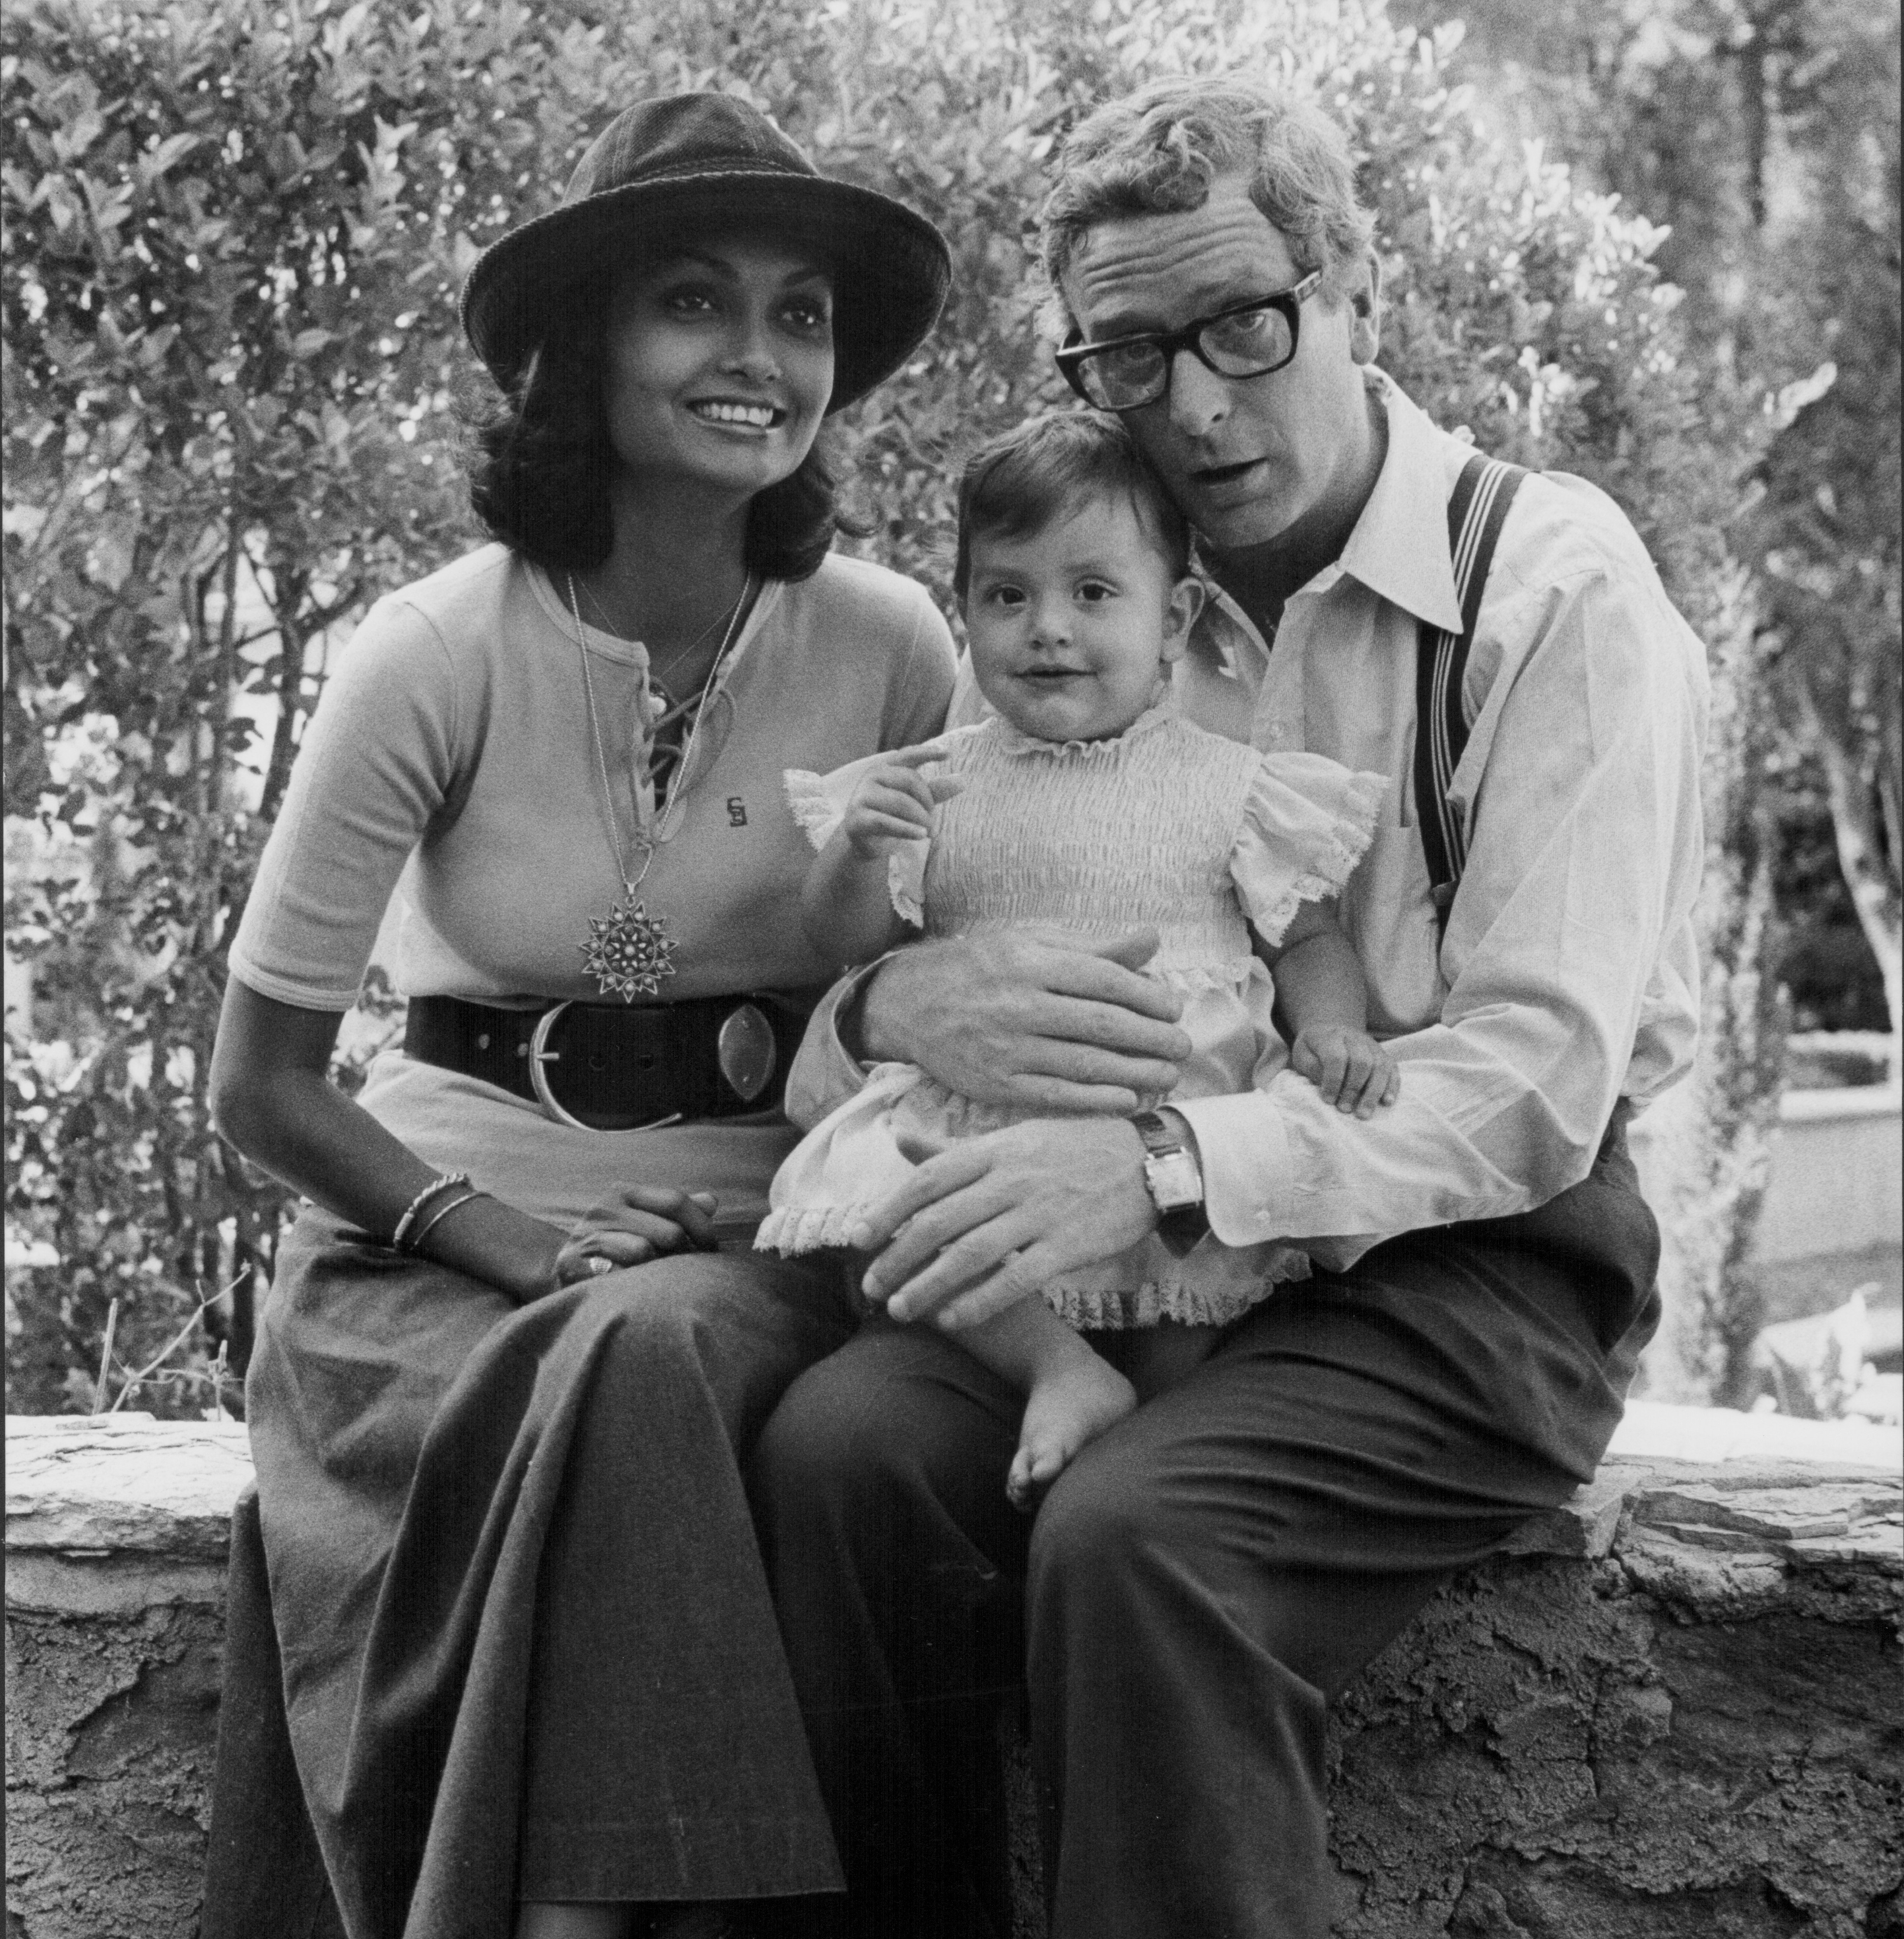 Actor Michael Caine with his wife Shakira Caine and their baby, behind the scenes of the movie "Peeper," circa 1976. | Source: Getty Images